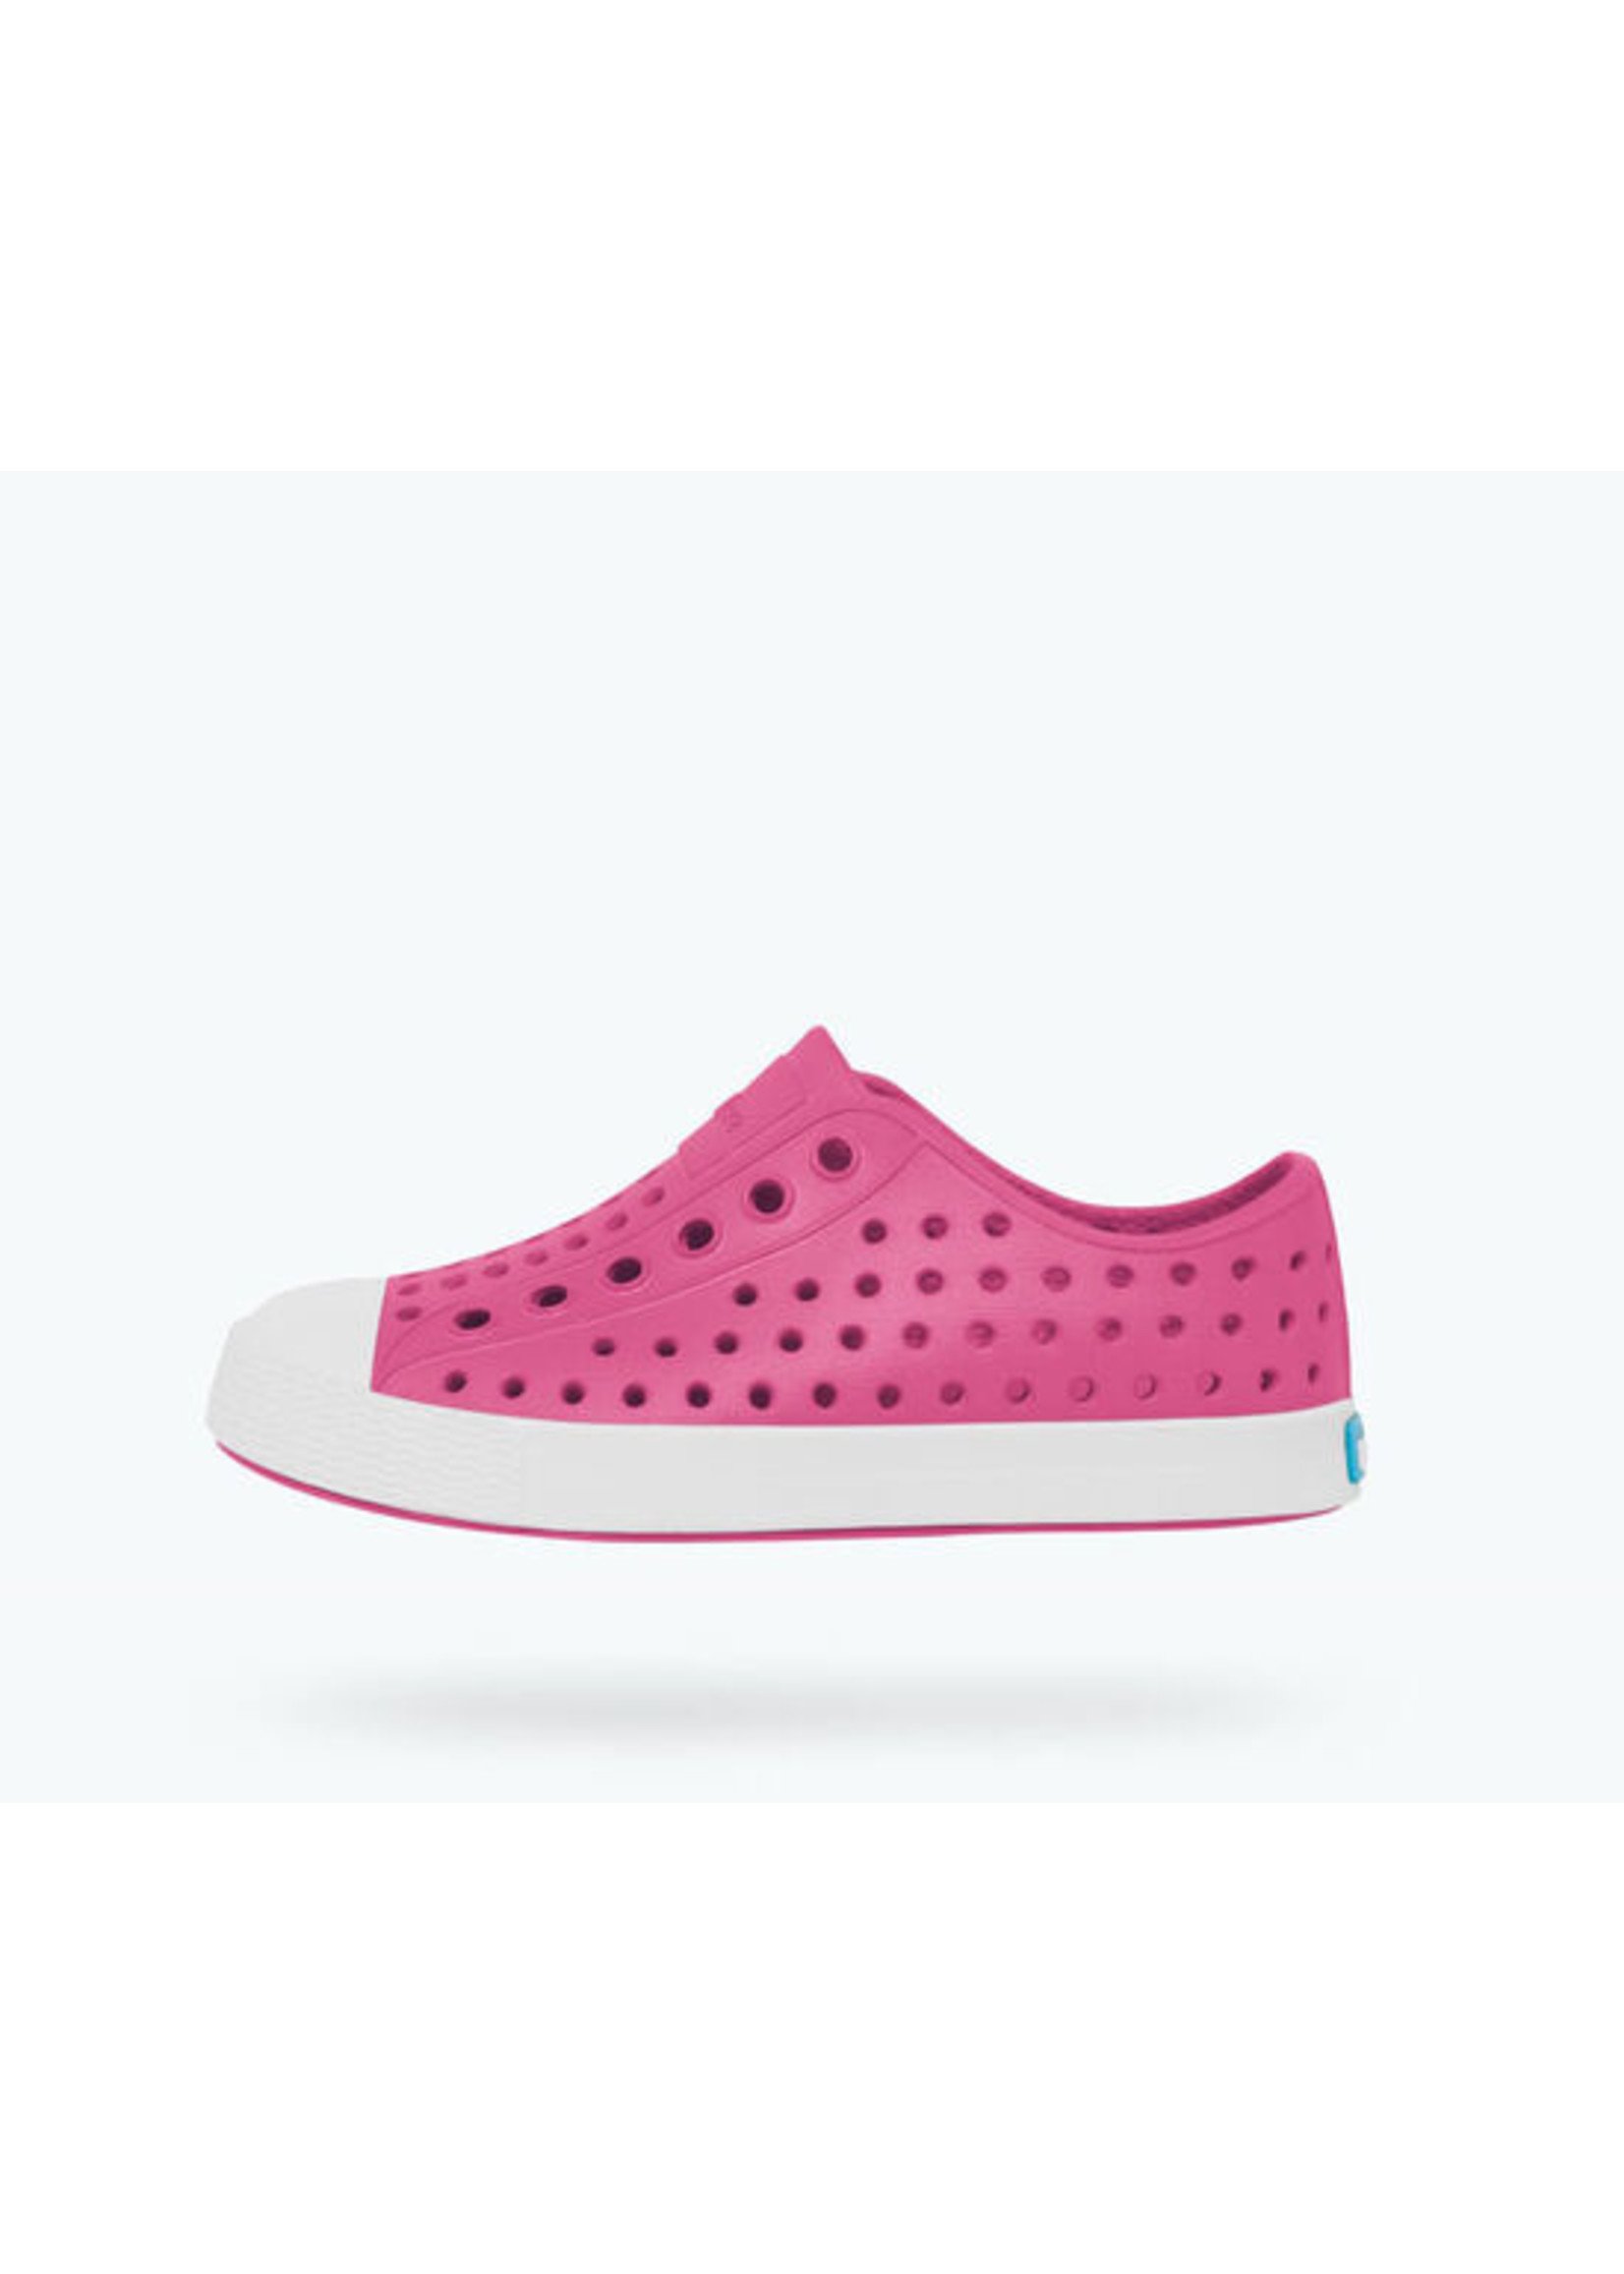 Native Jefferson Child - Hollywood Pink/Shell White